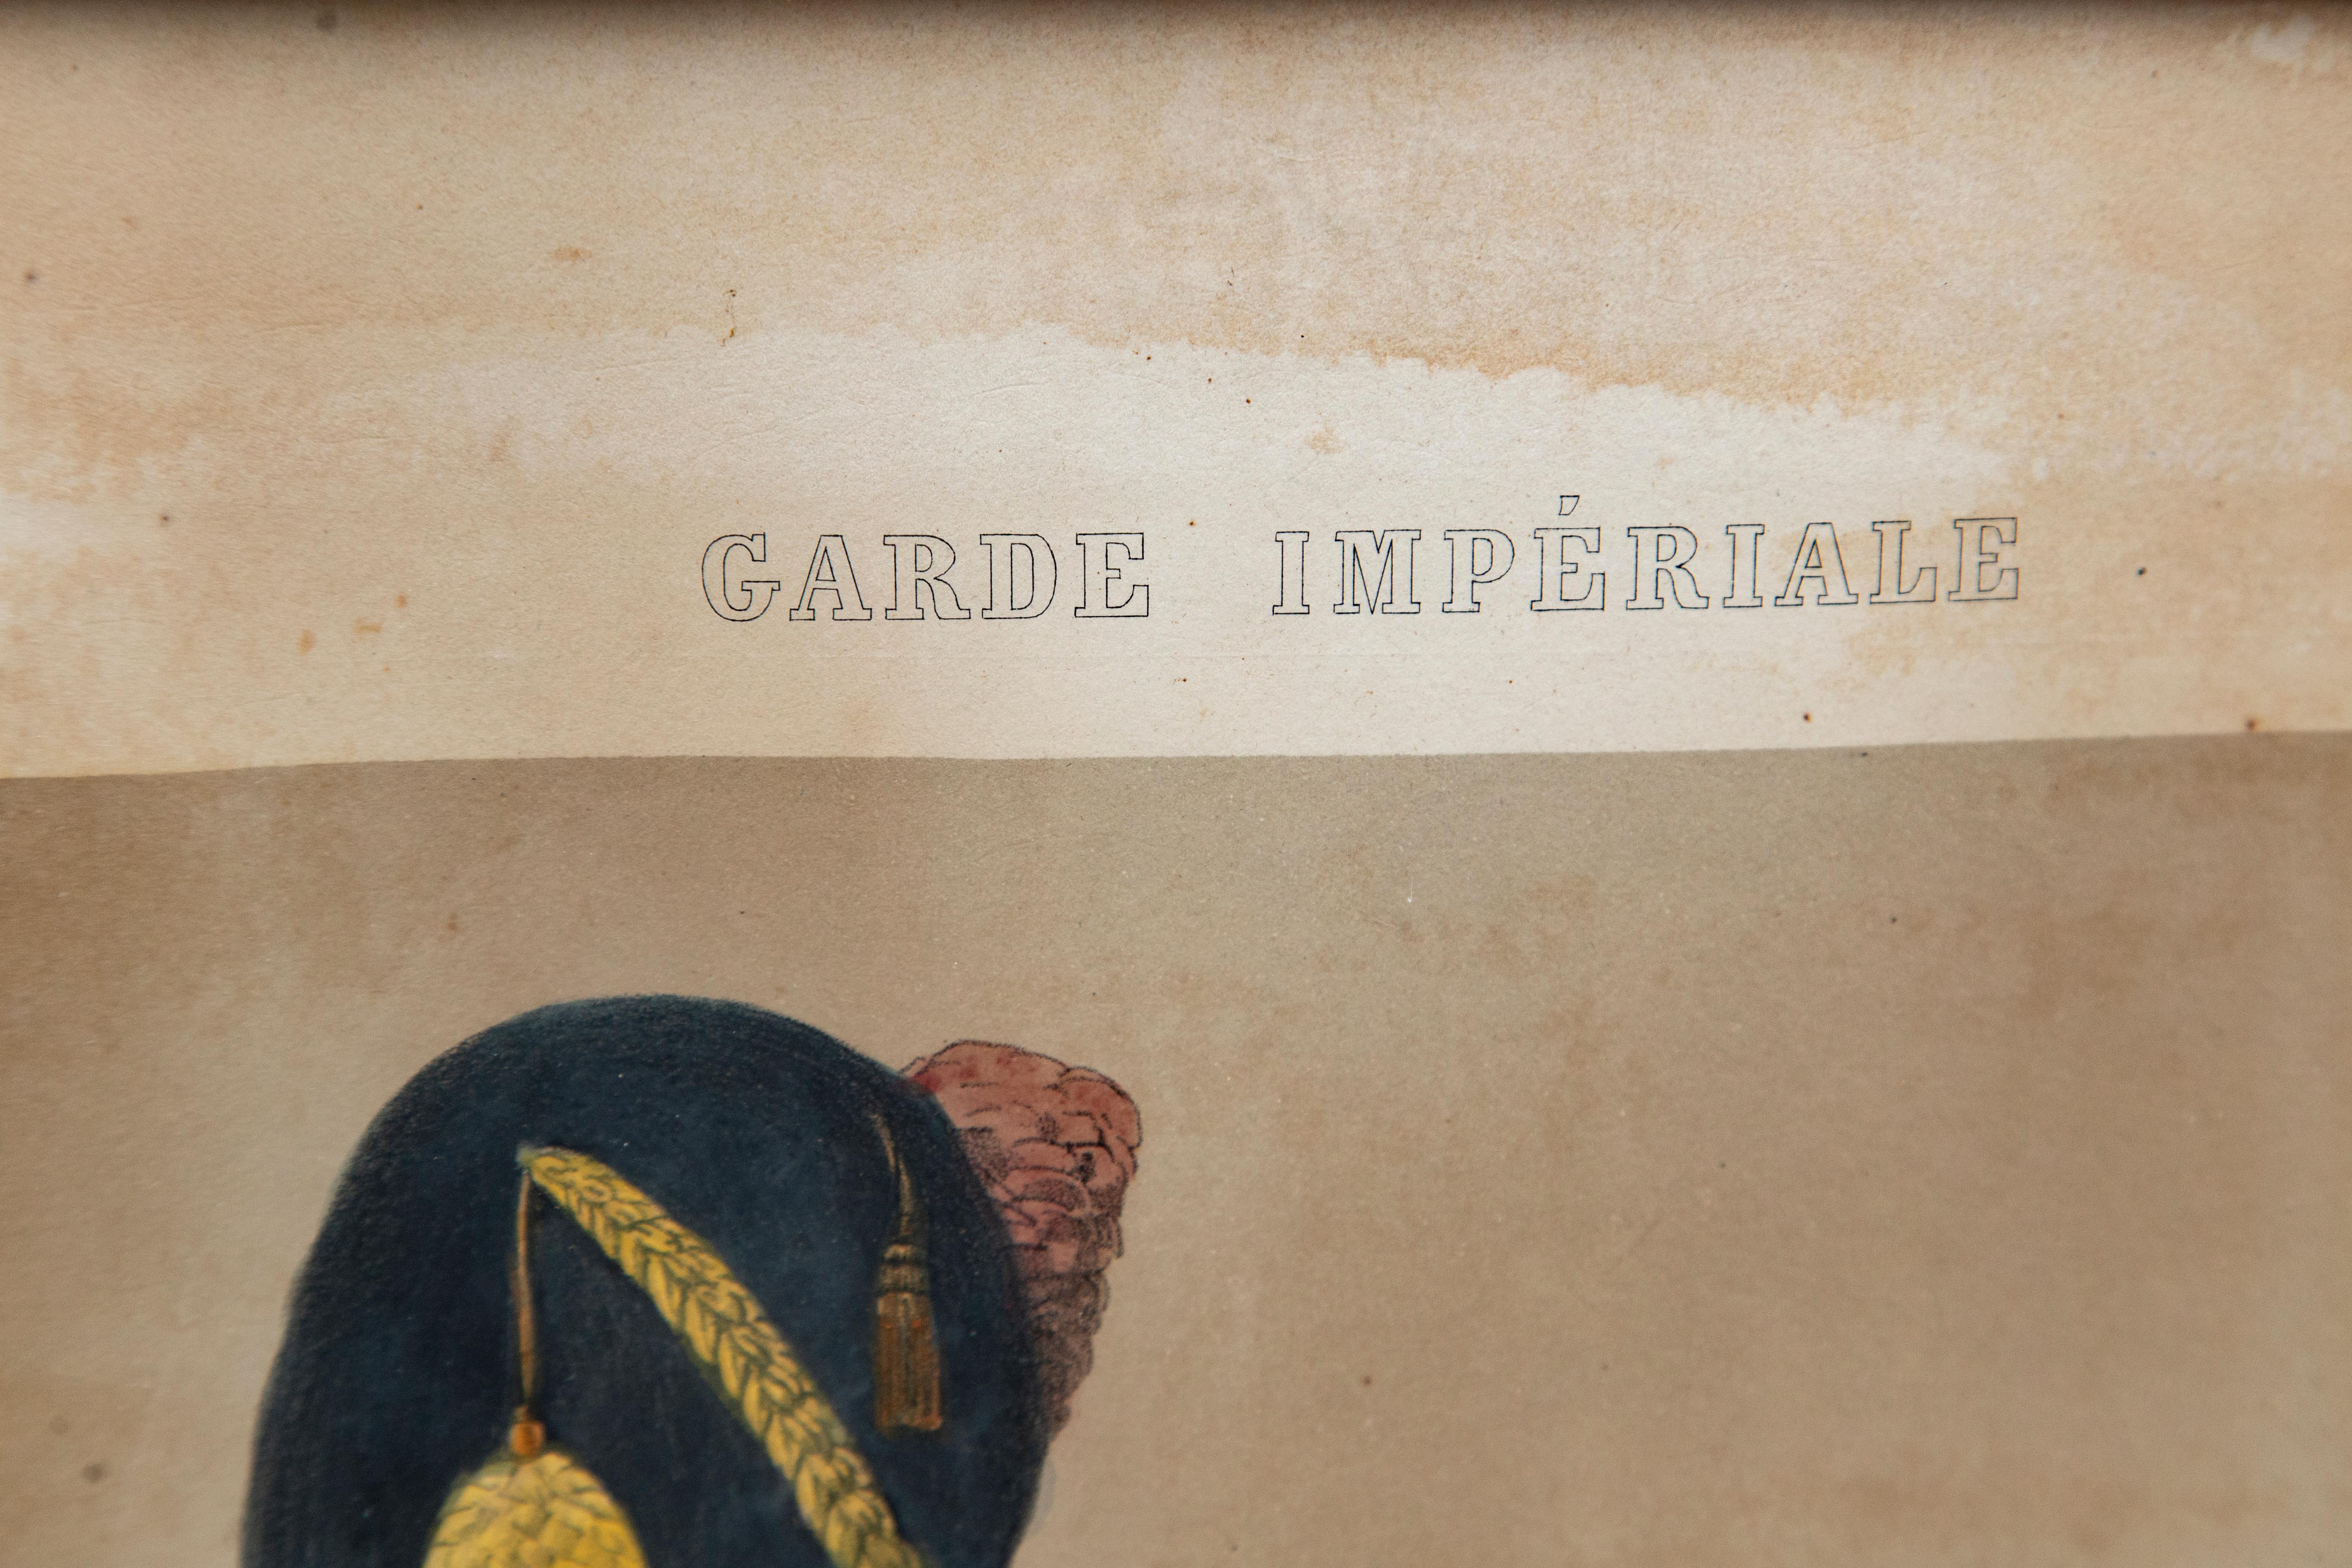 19th Century Set of 5 Hand Colored Prints of Garde Imperiale